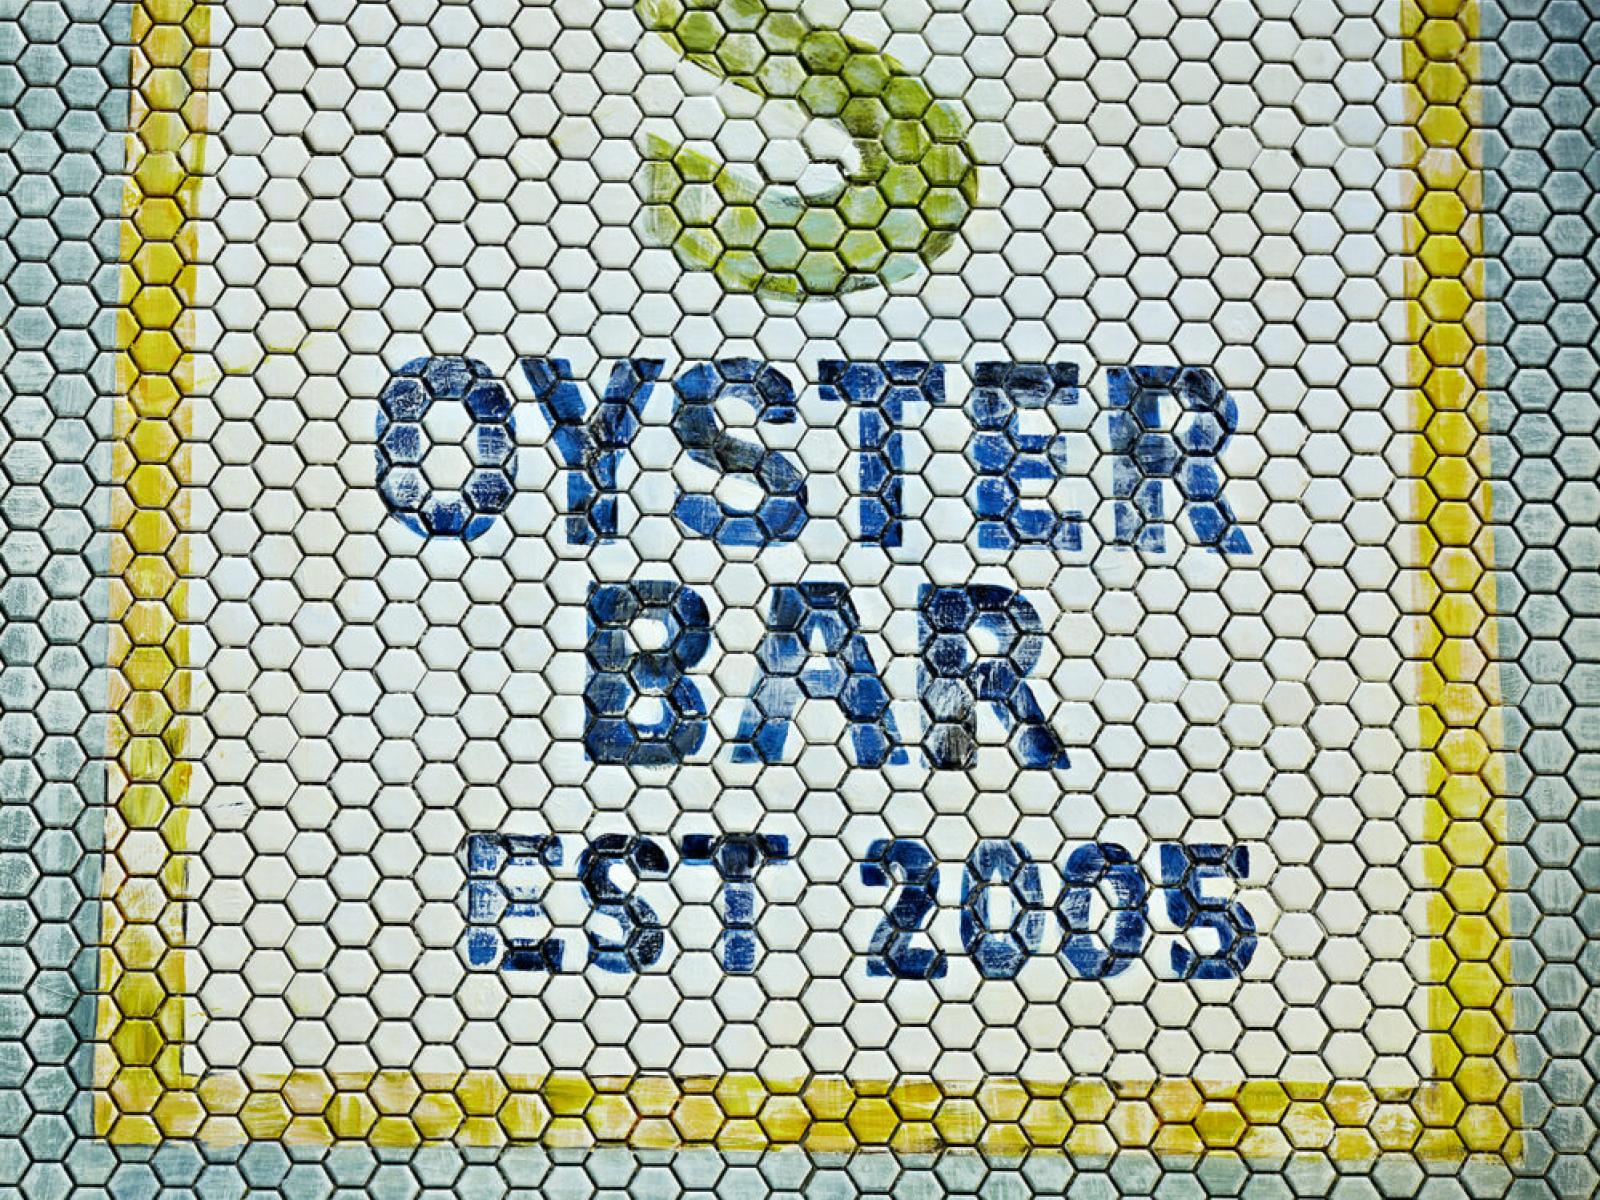 Tile mosaic with the words "Oyster Bar Est 2005" in white, blue, and yellow